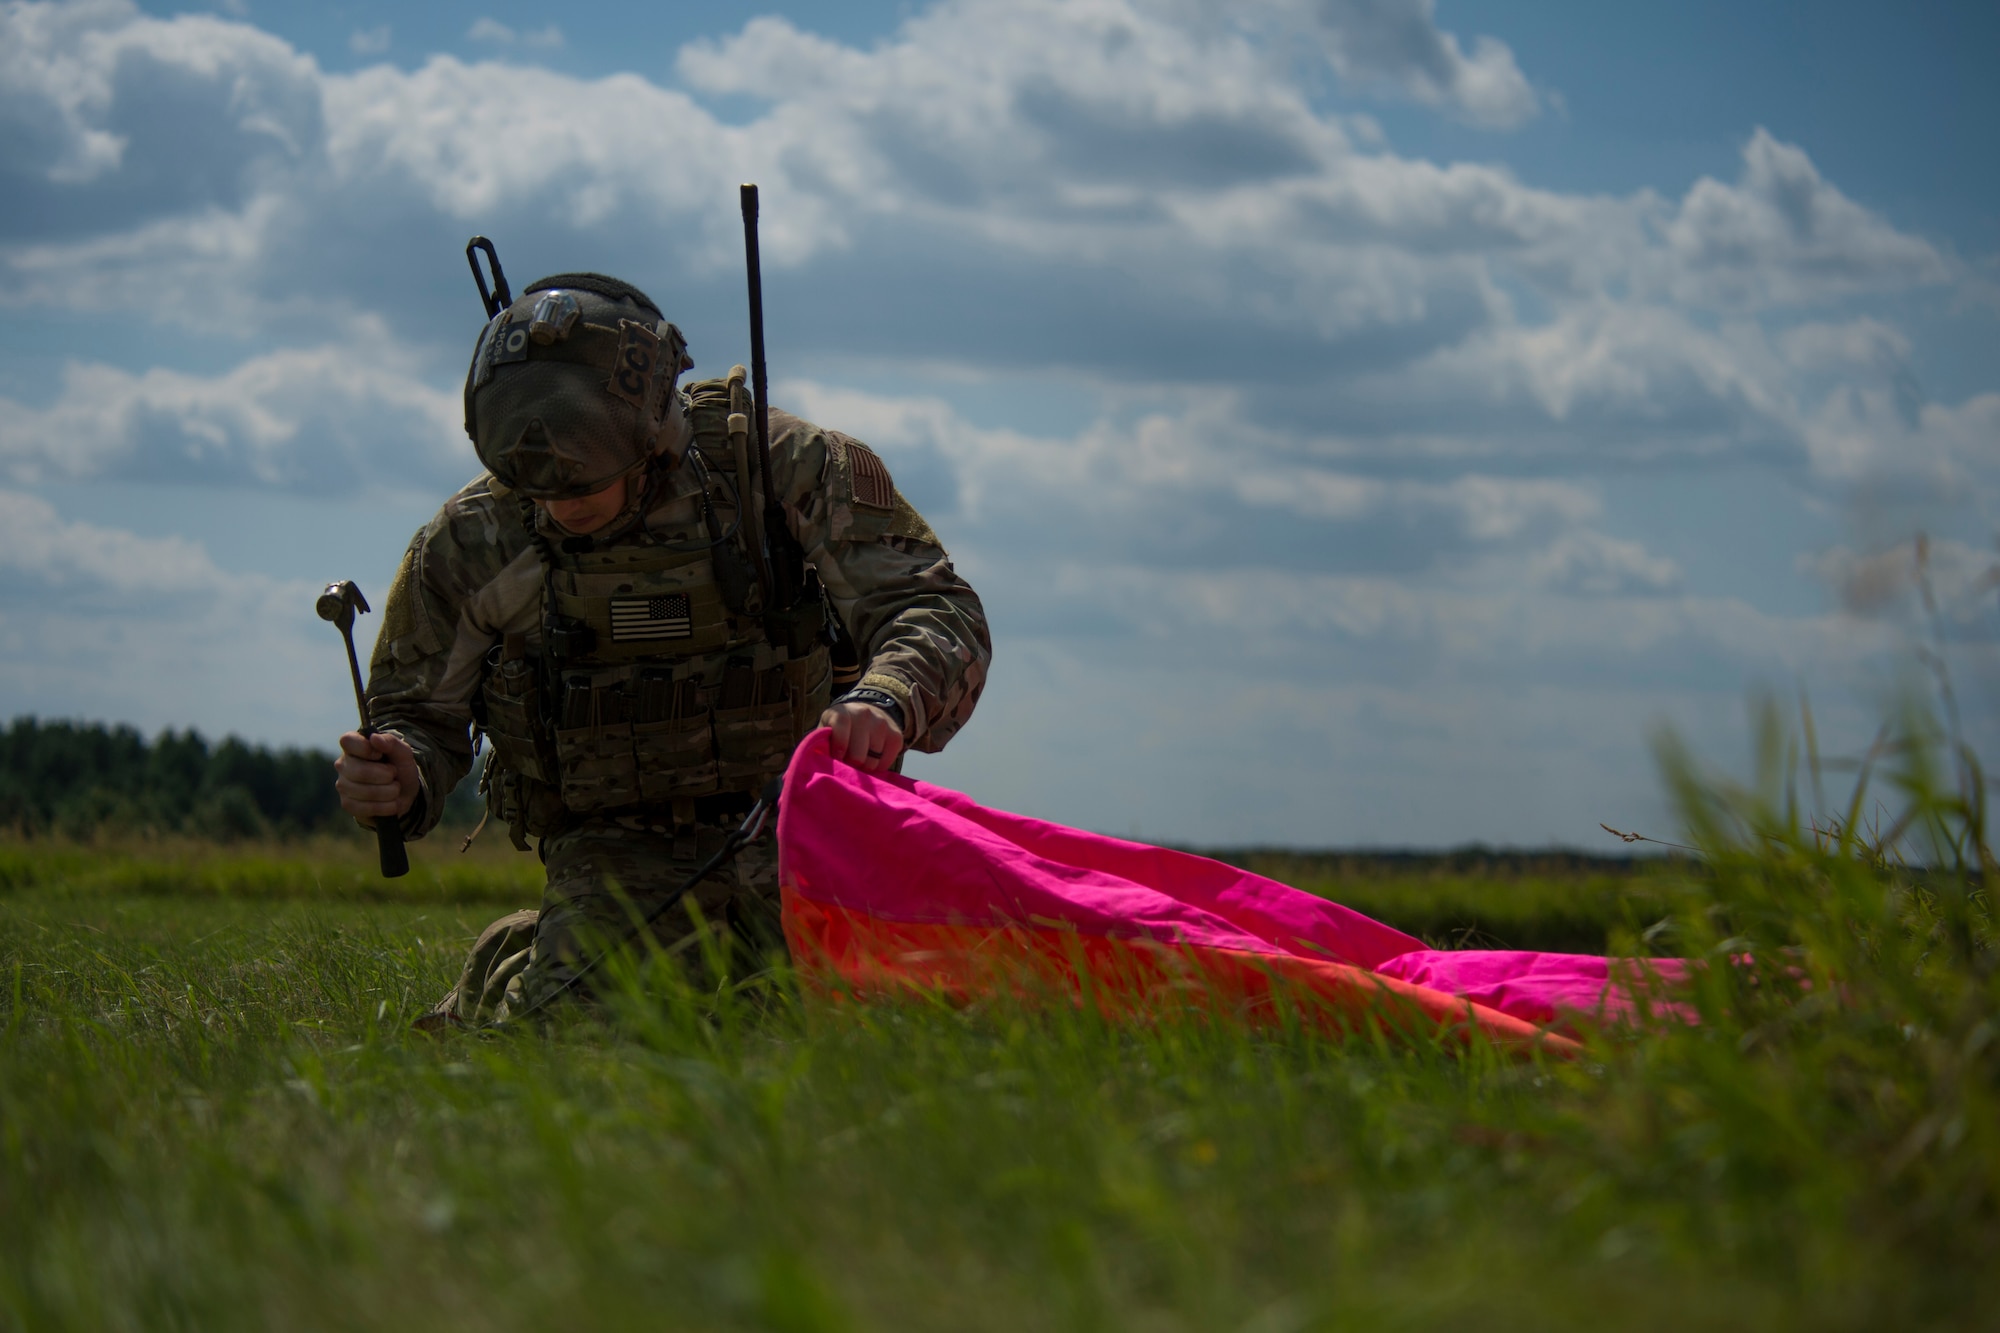 A 321st Special Tactics Squadron combat controller hammers a distance marker into place before the start of an austere landing training exercise at Nowe Miasto, Poland, July 20, 2015. The colorful markers are used as a reference point to aid pilots when landing on unimproved surfaces. (U.S. Air Force photo by Airman 1st Class Luke Kitterman/Released)